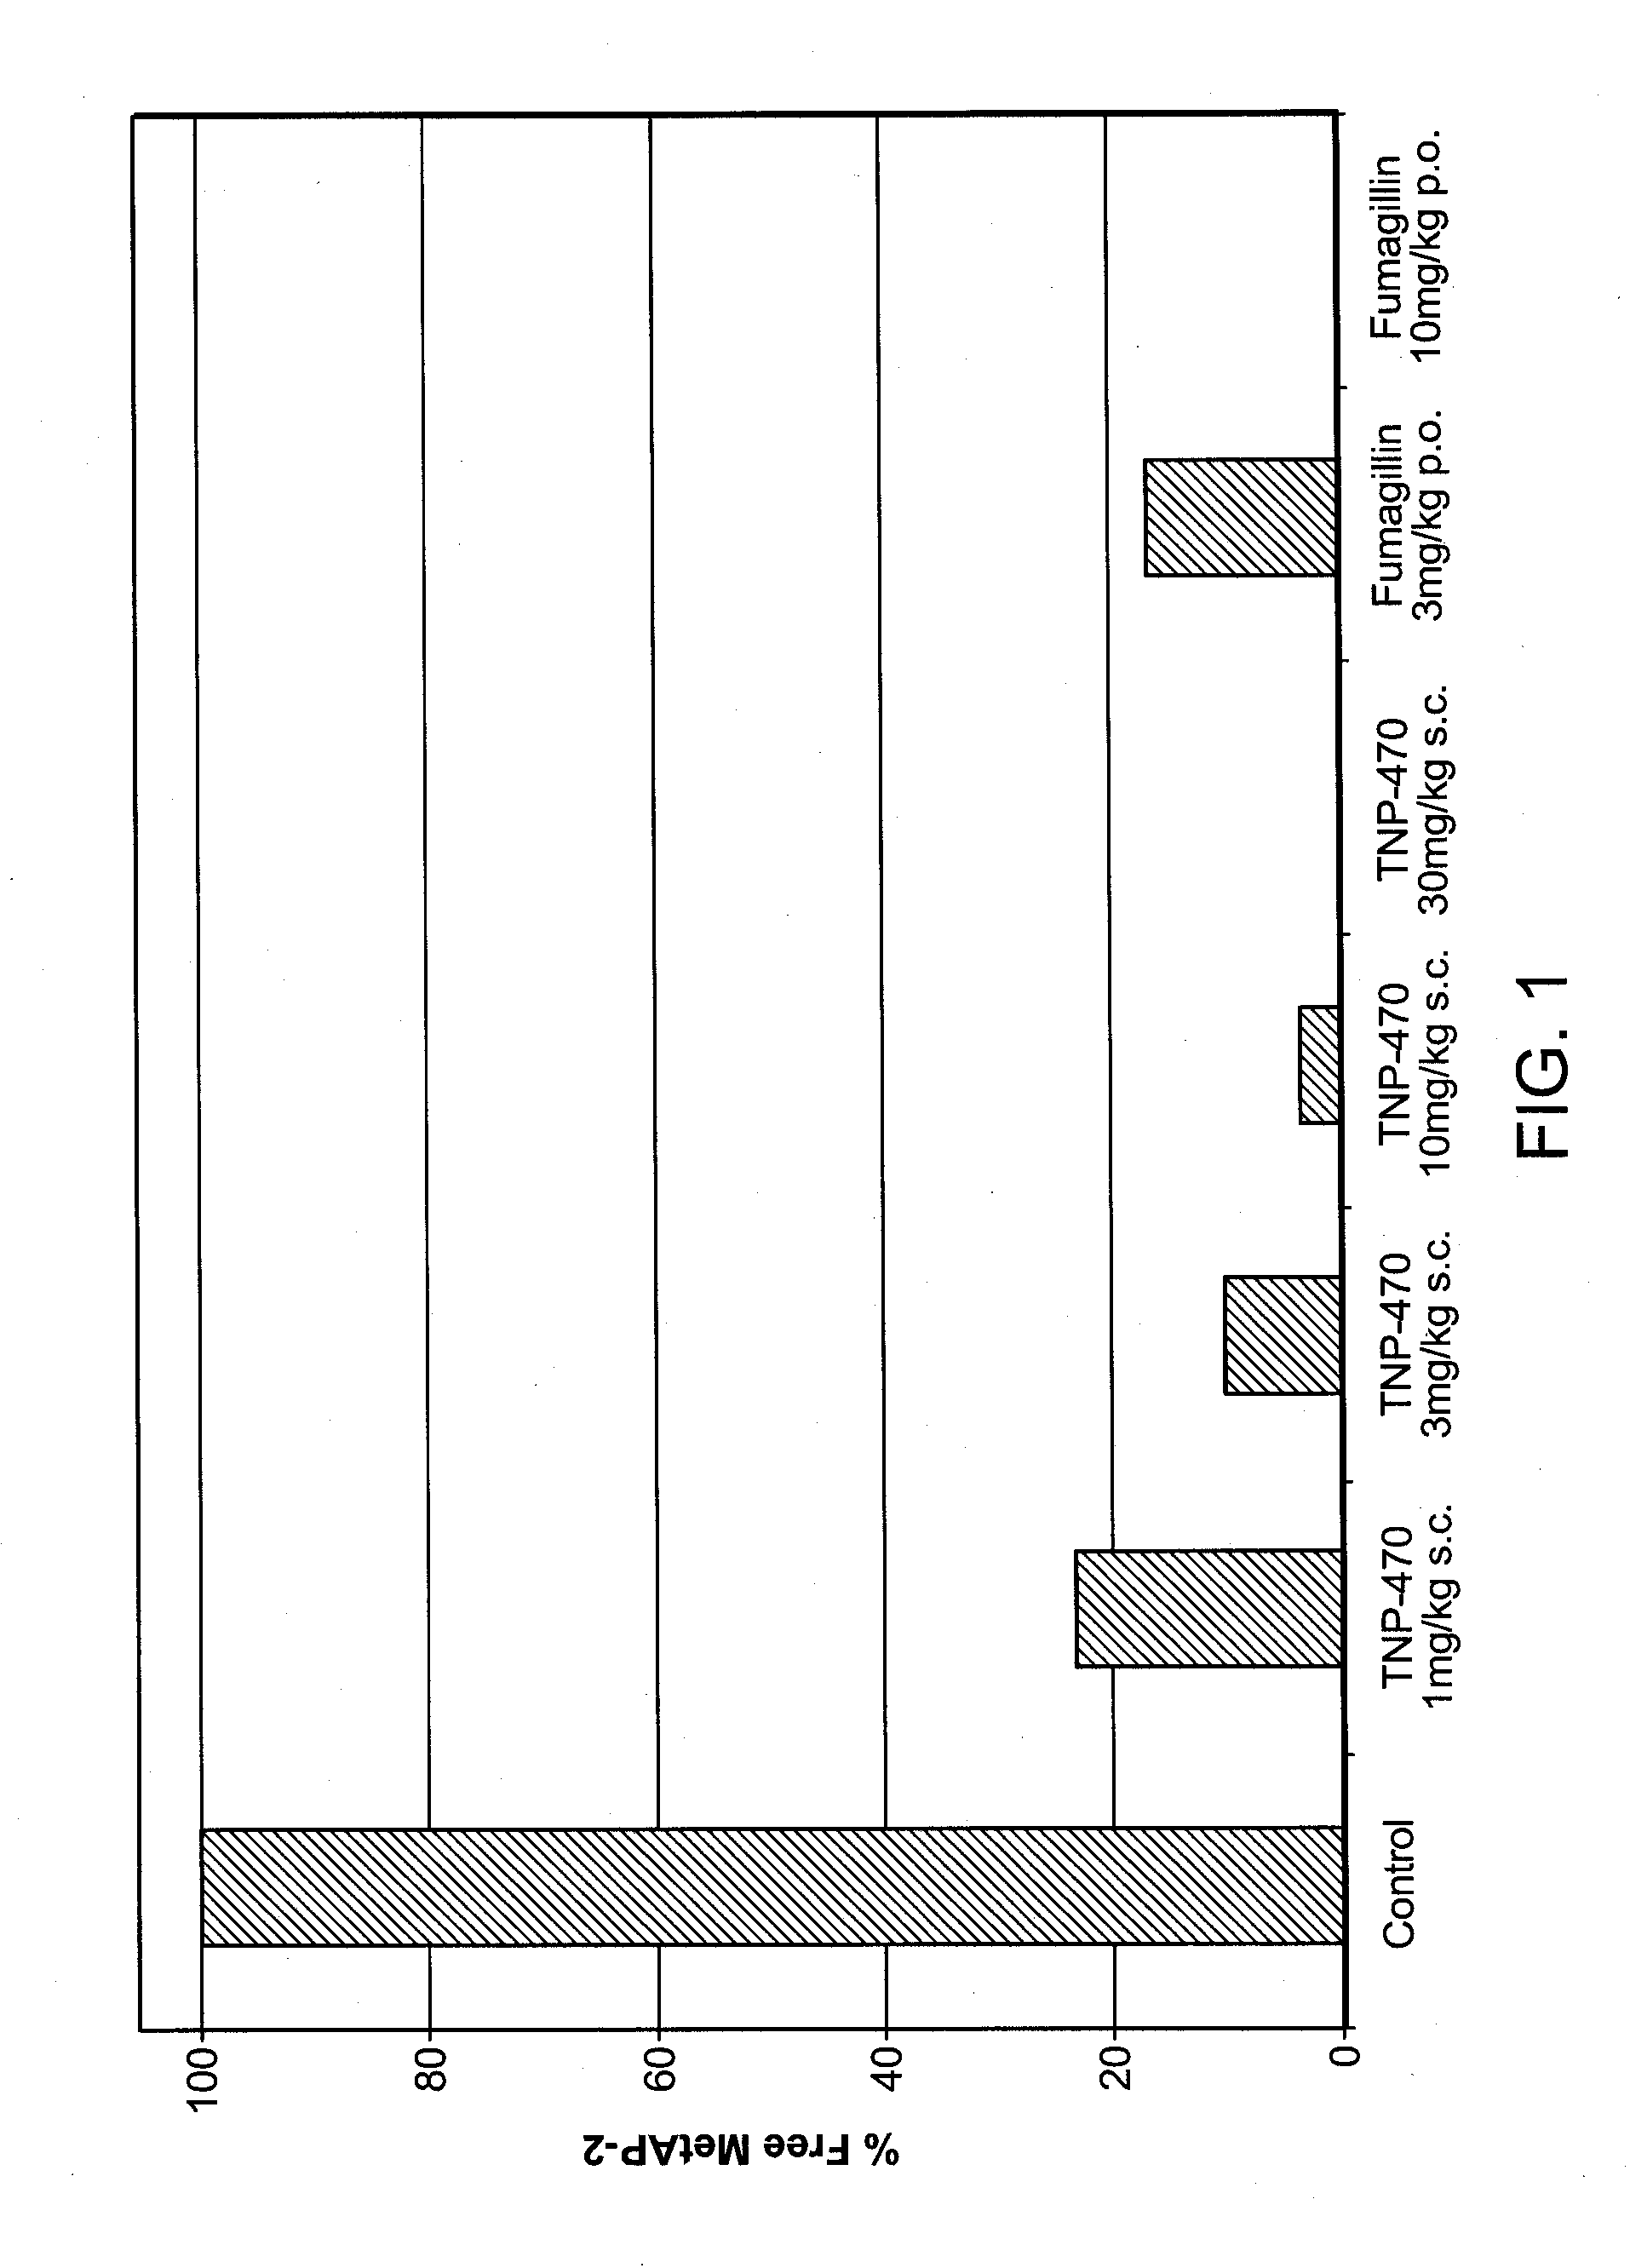 Methods of treating an overweight or obese subject